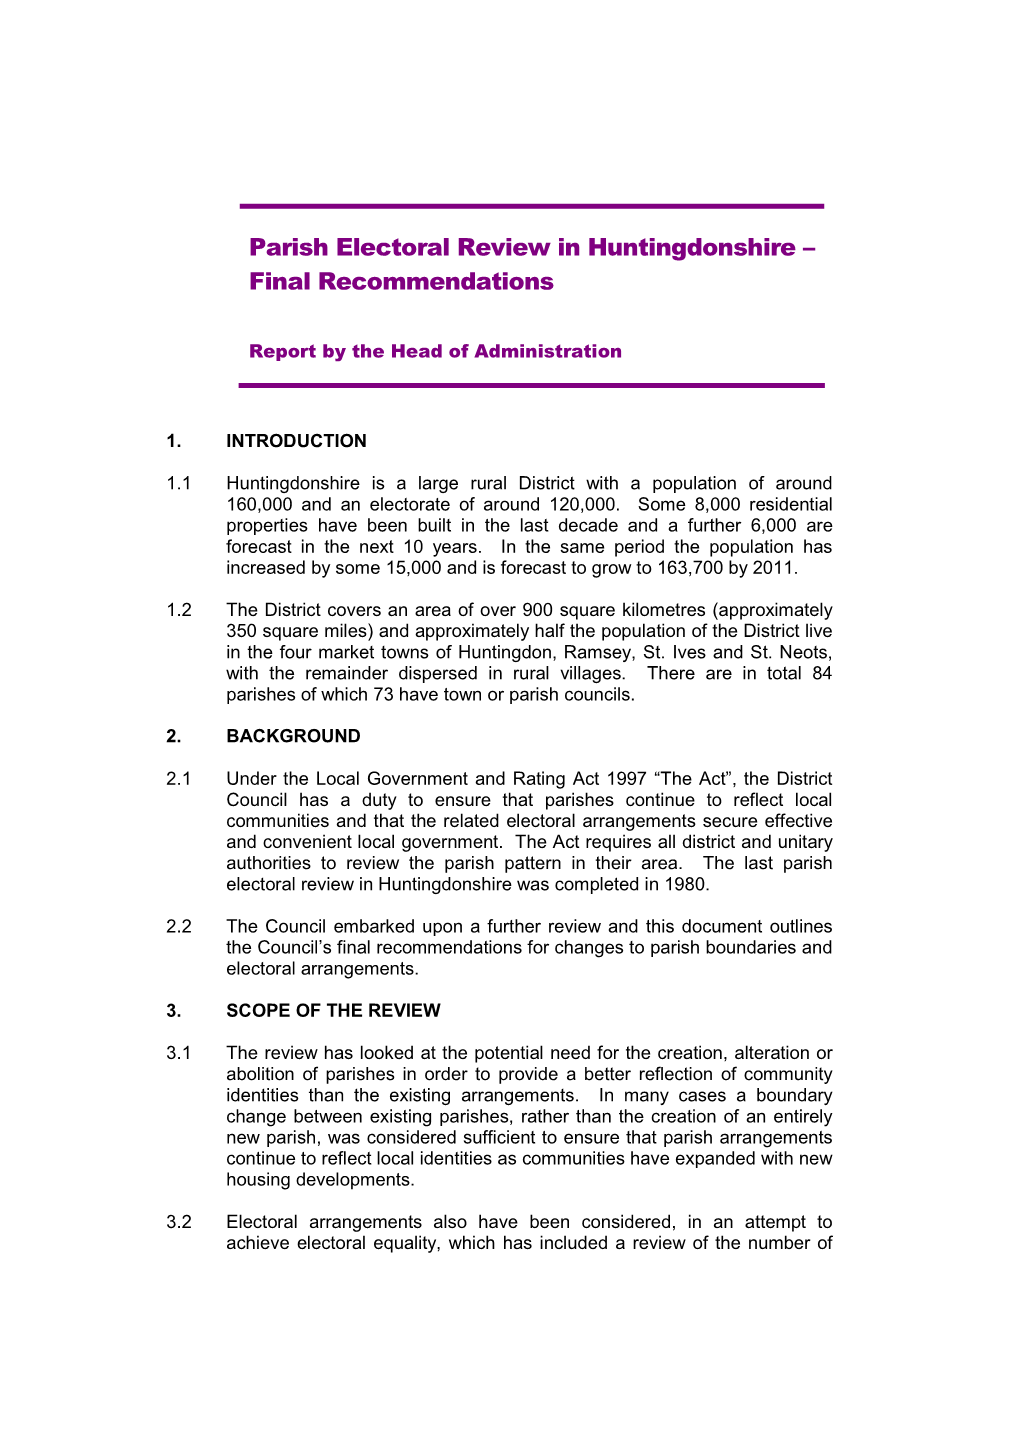 Parish Electoral Review in Huntingdonshire – Final Recommendations